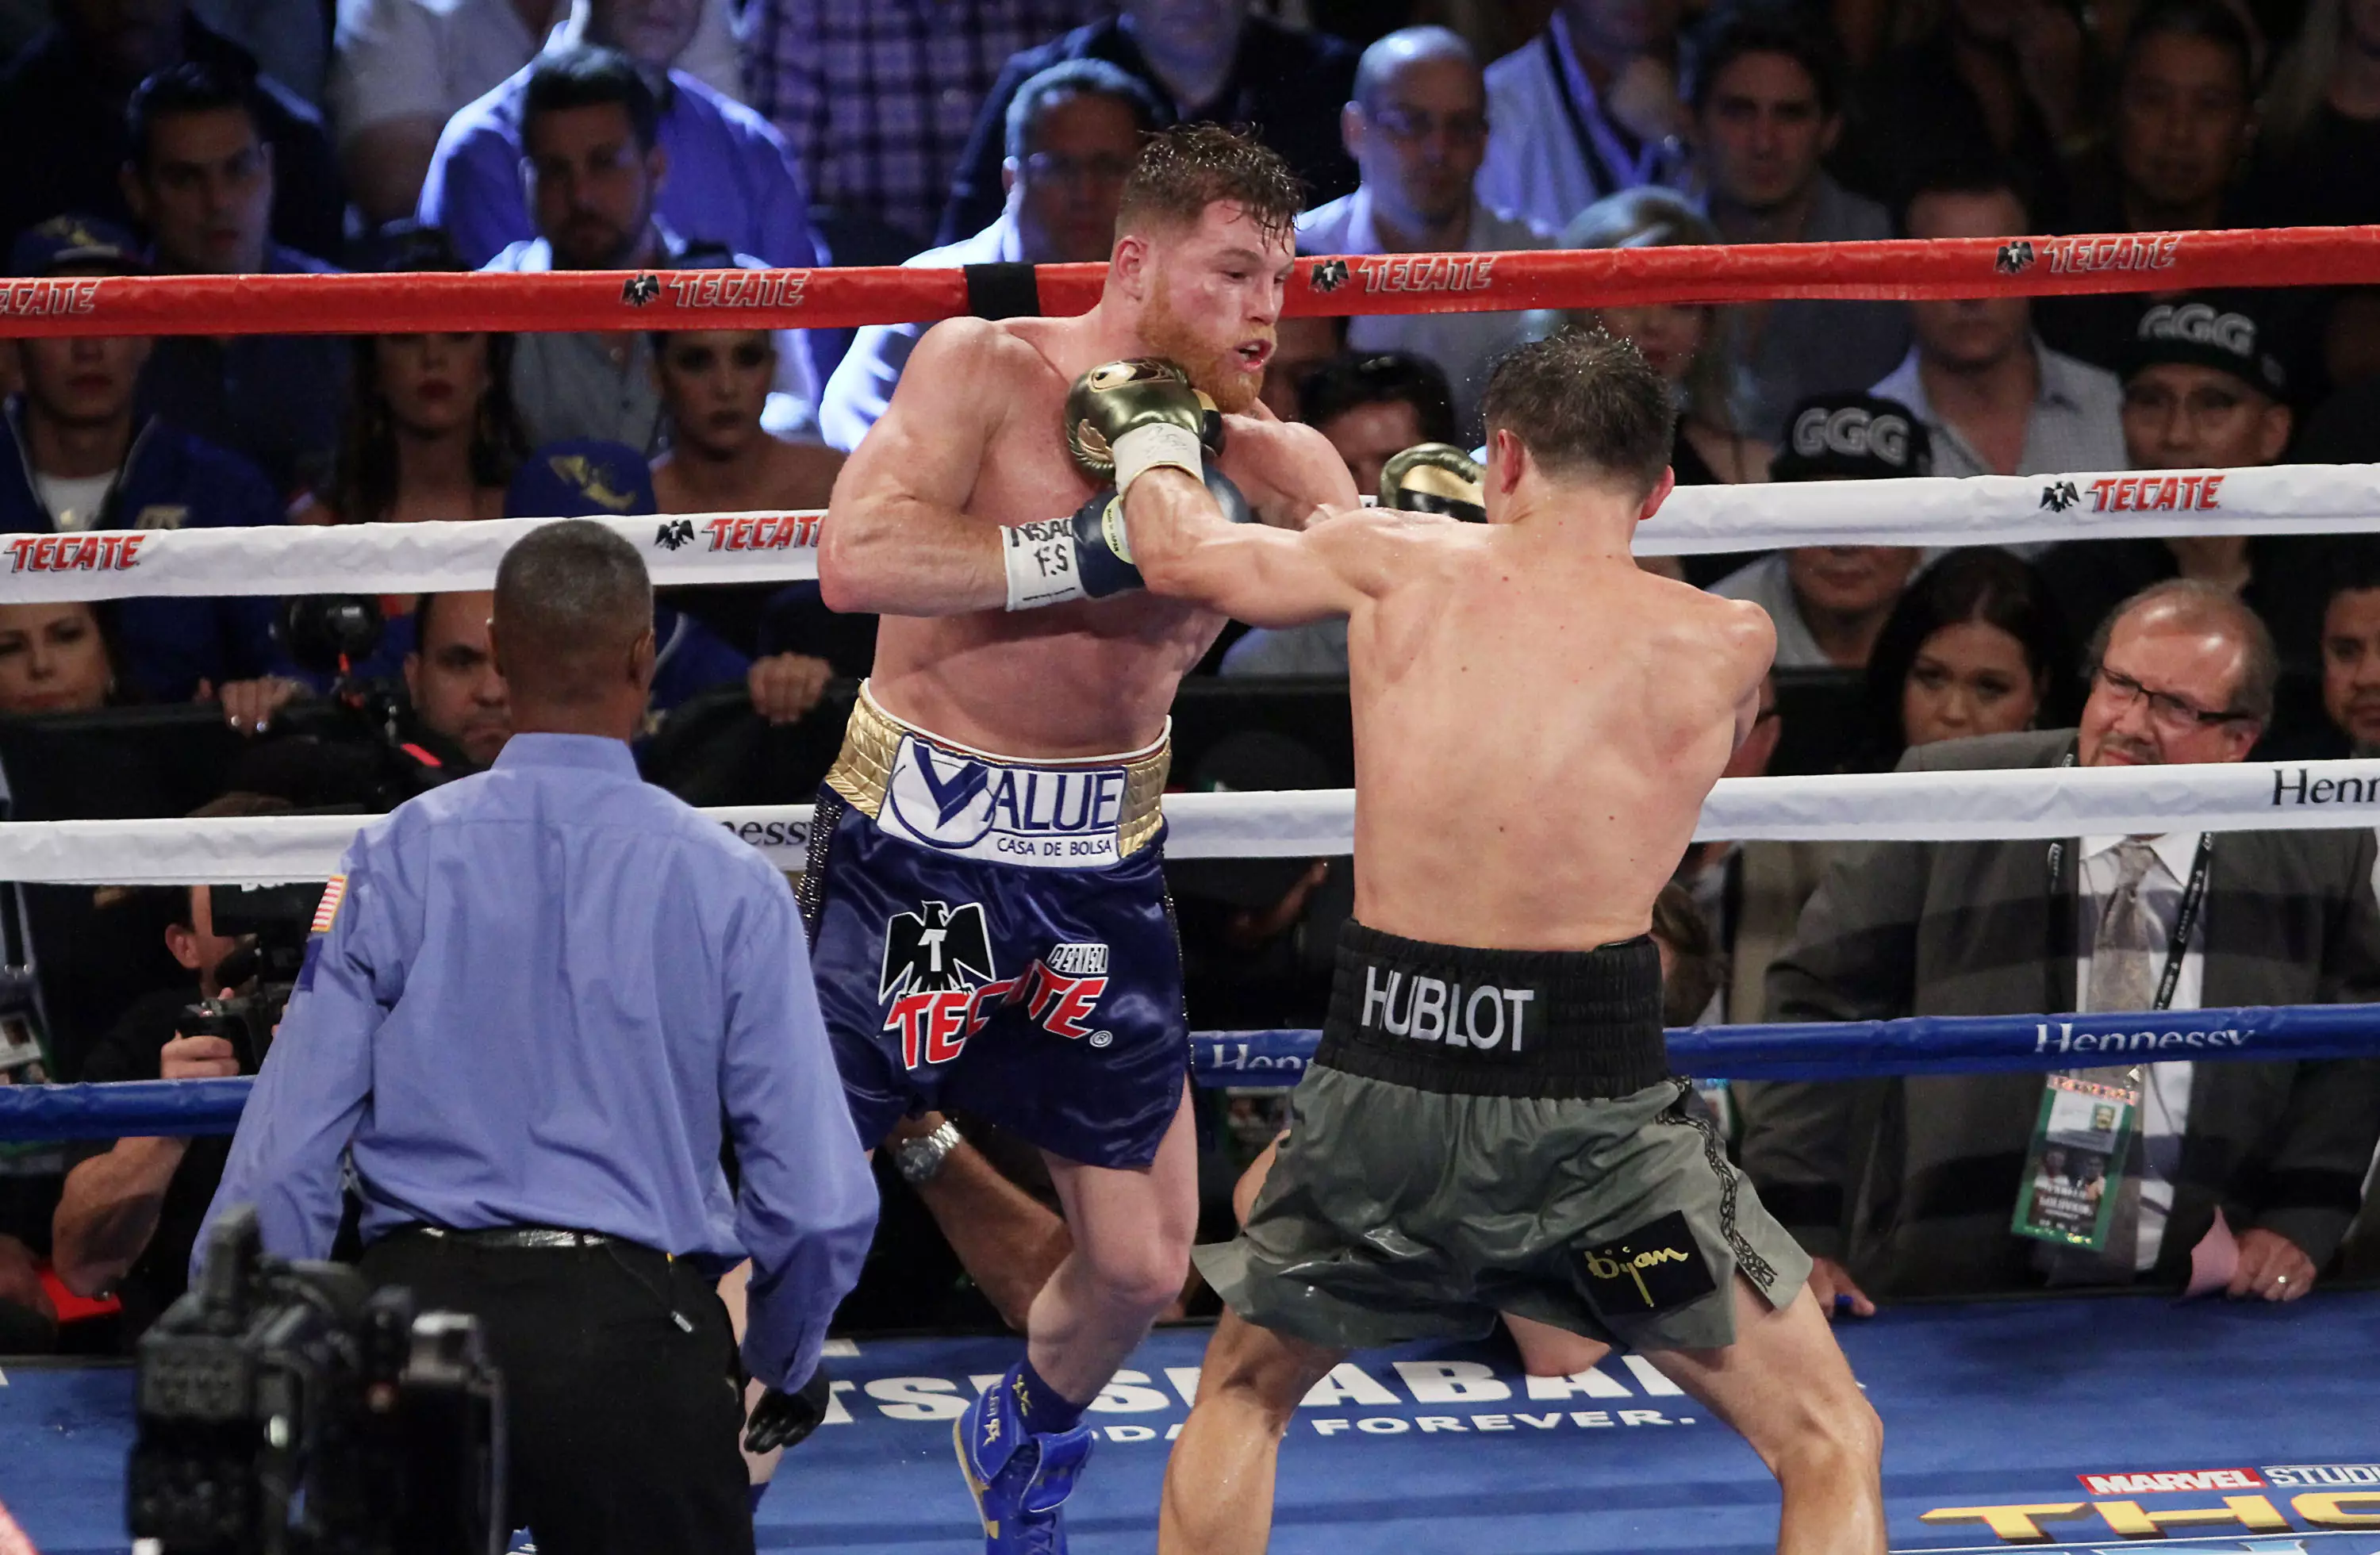 'Canelo' and 'GGG' trade blows. Image: PA